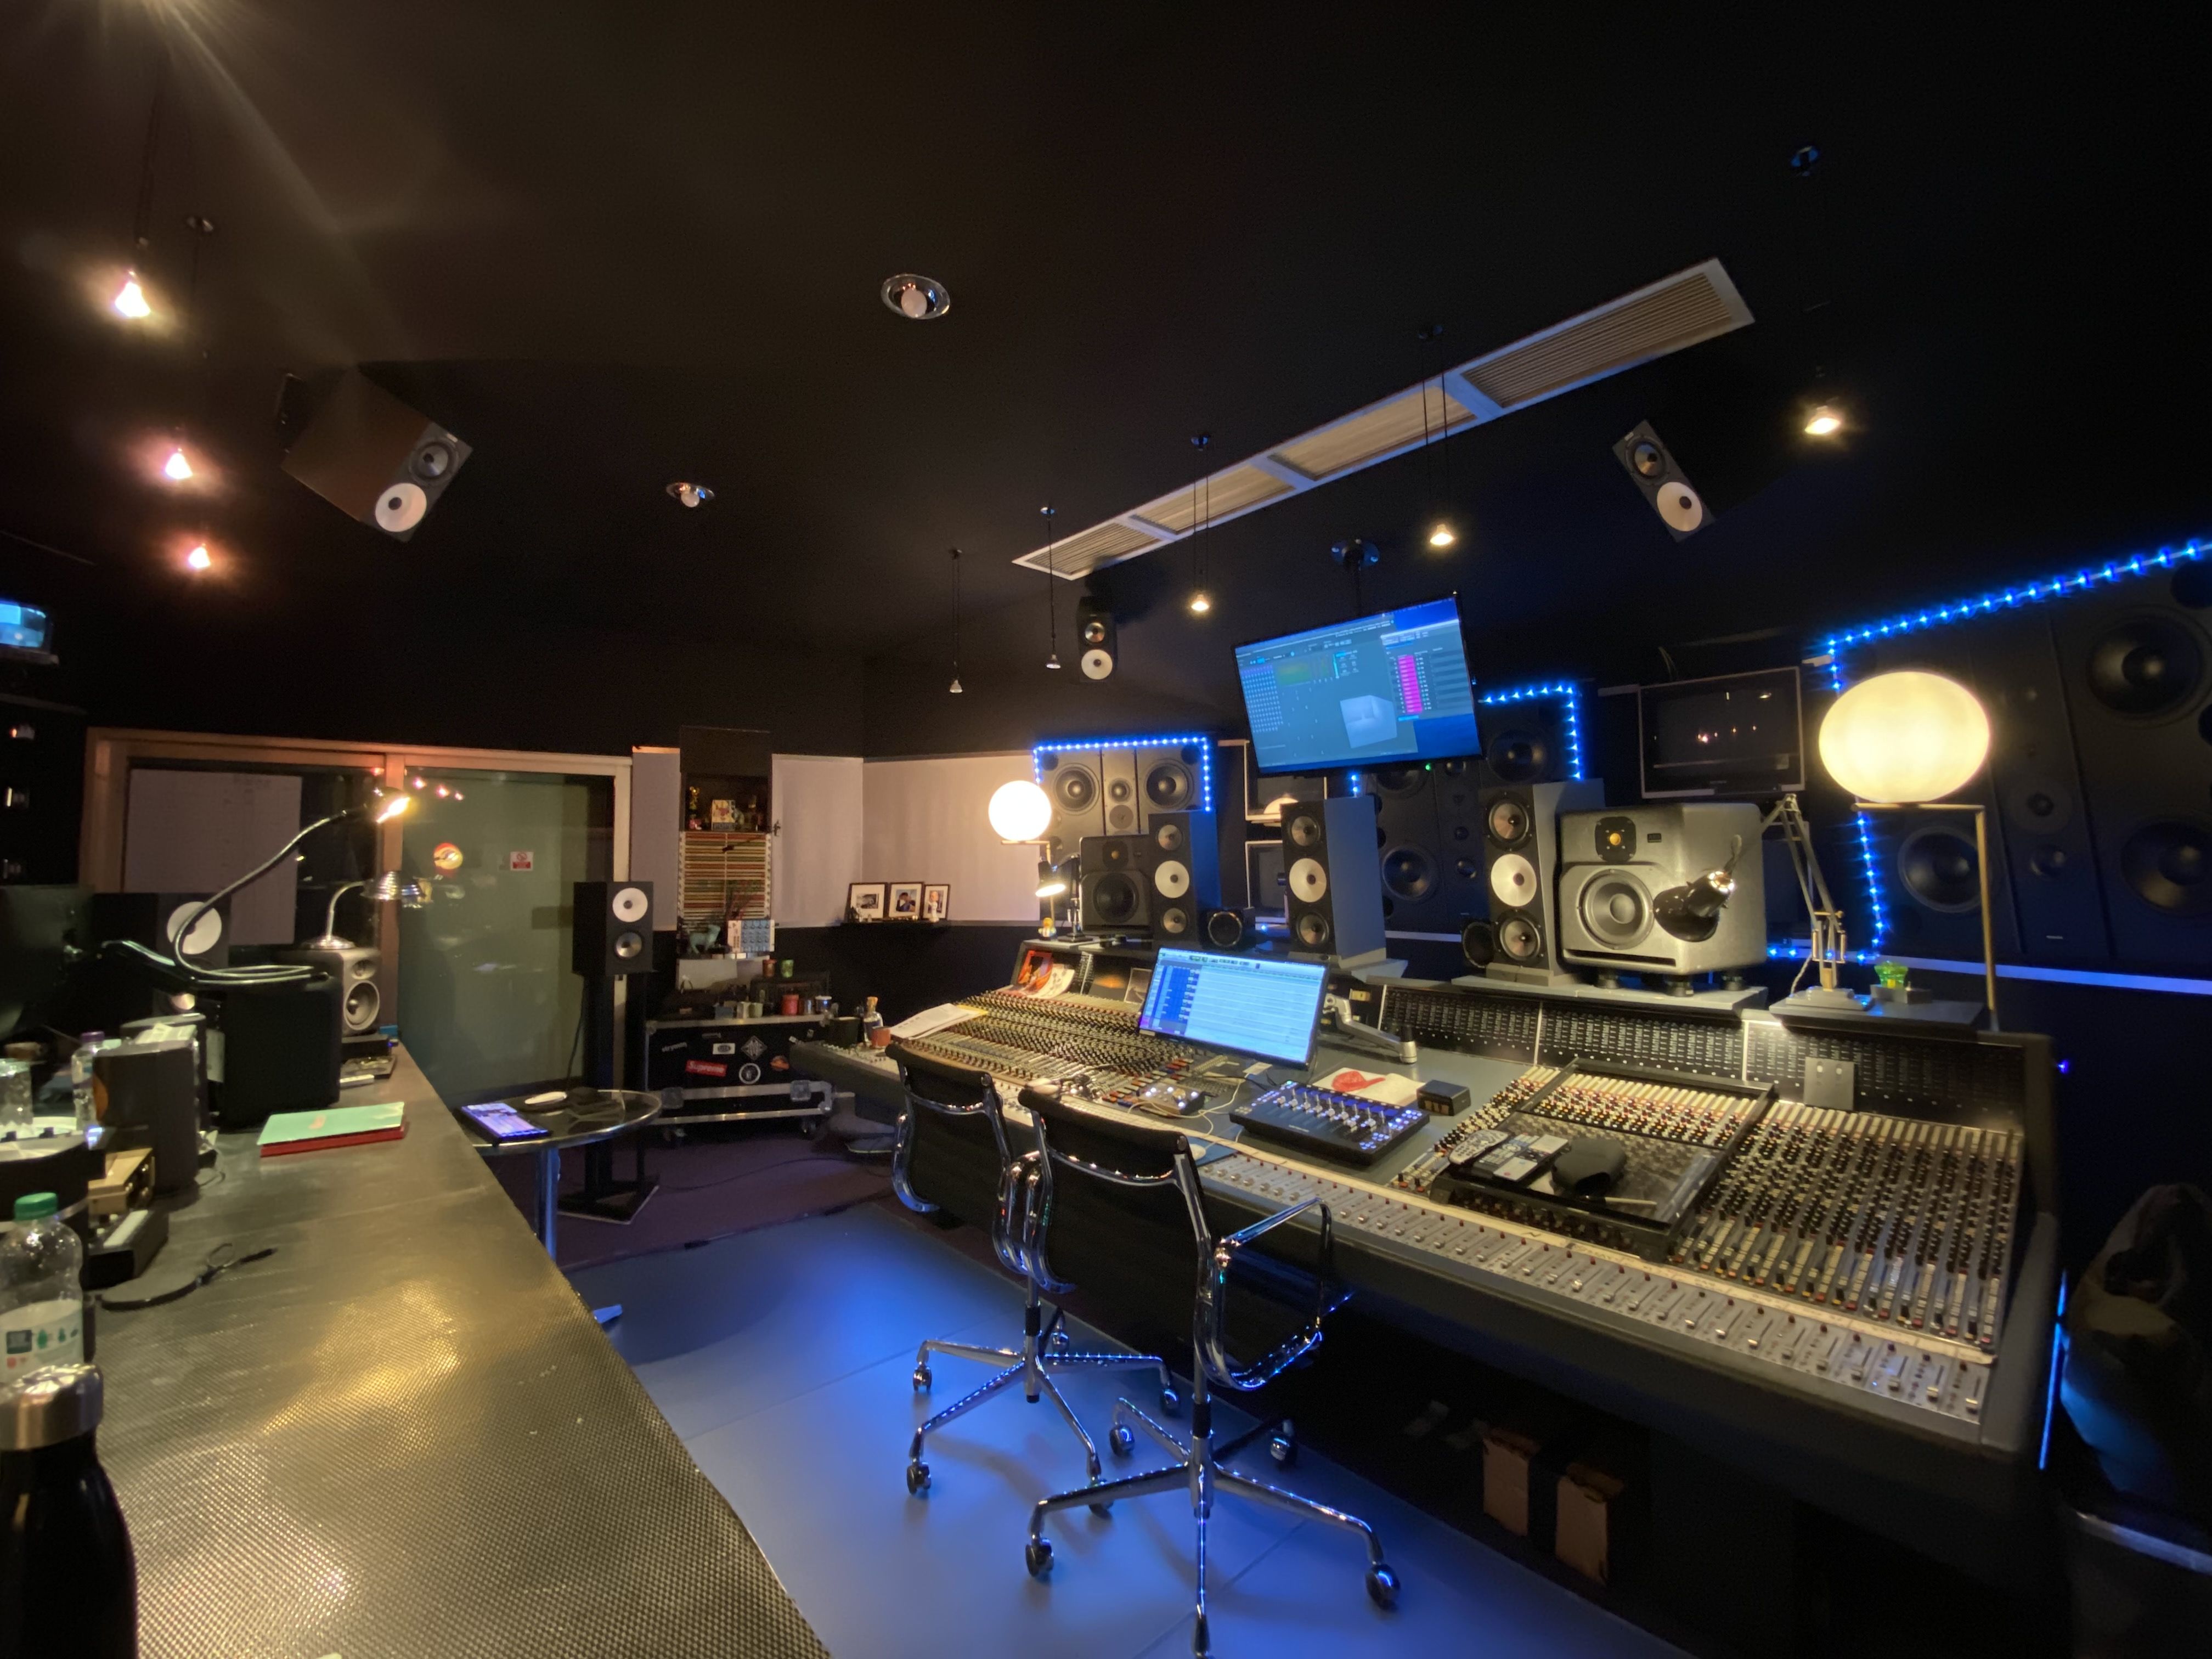 Full view of the 7.1.4 Atmos Setup in Fitzmaurice's studio